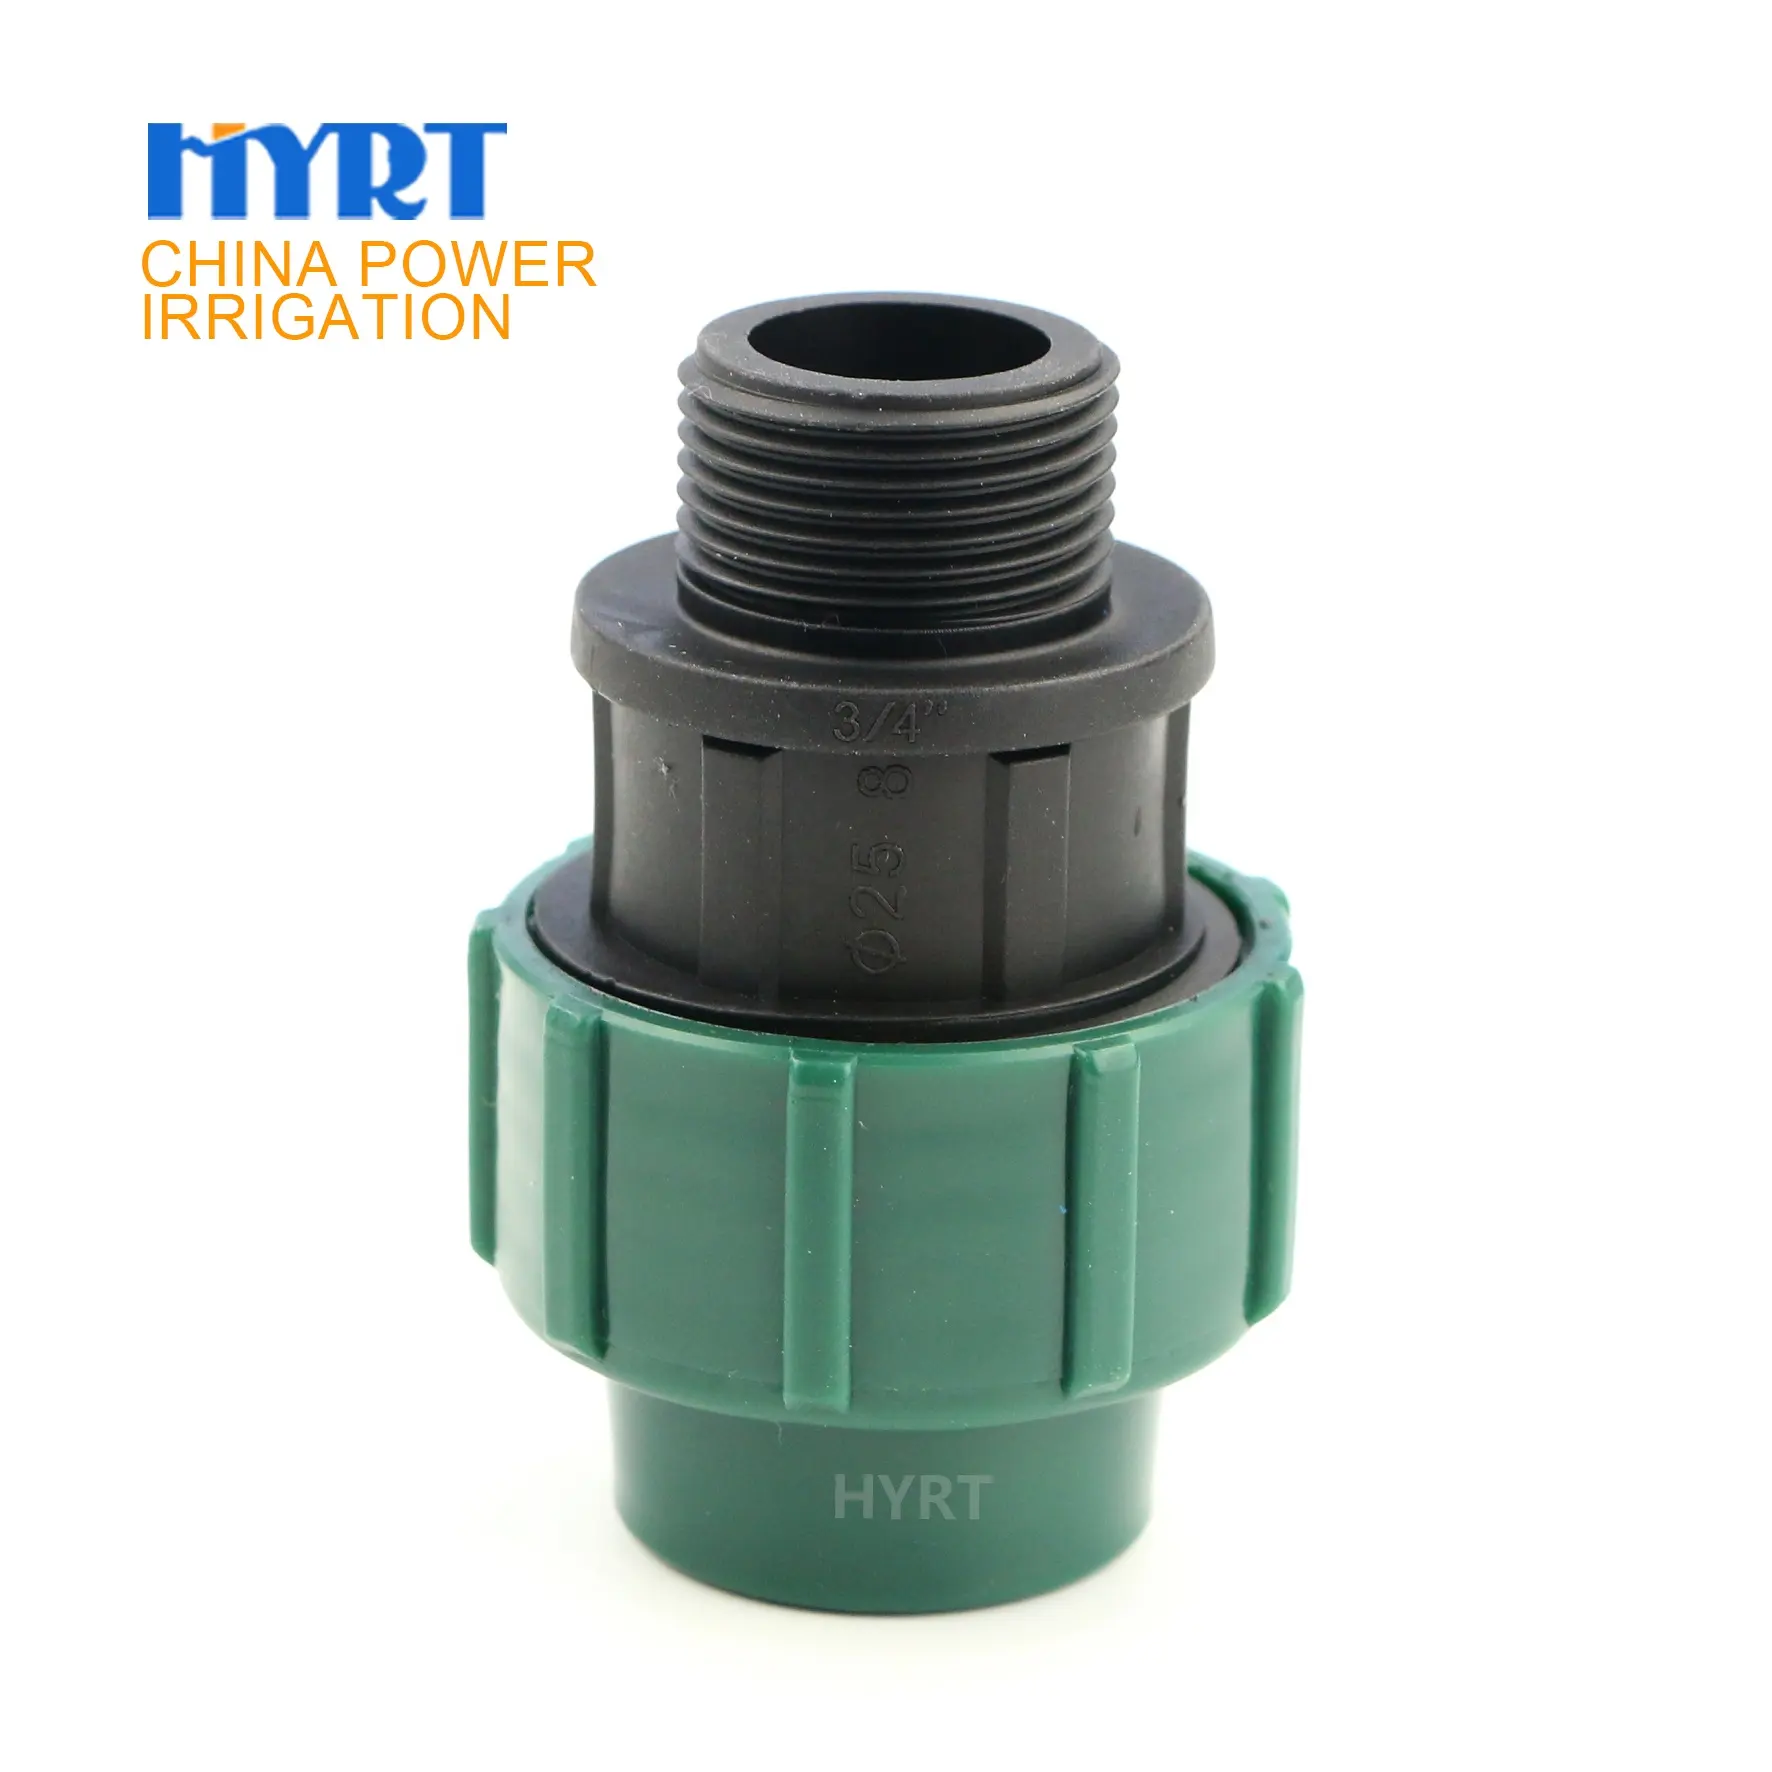 32mm50mm63mm drip irrigation system HDPE compression fitting Drip Irrigation Pipe Fittings for drip system or agriculture sys